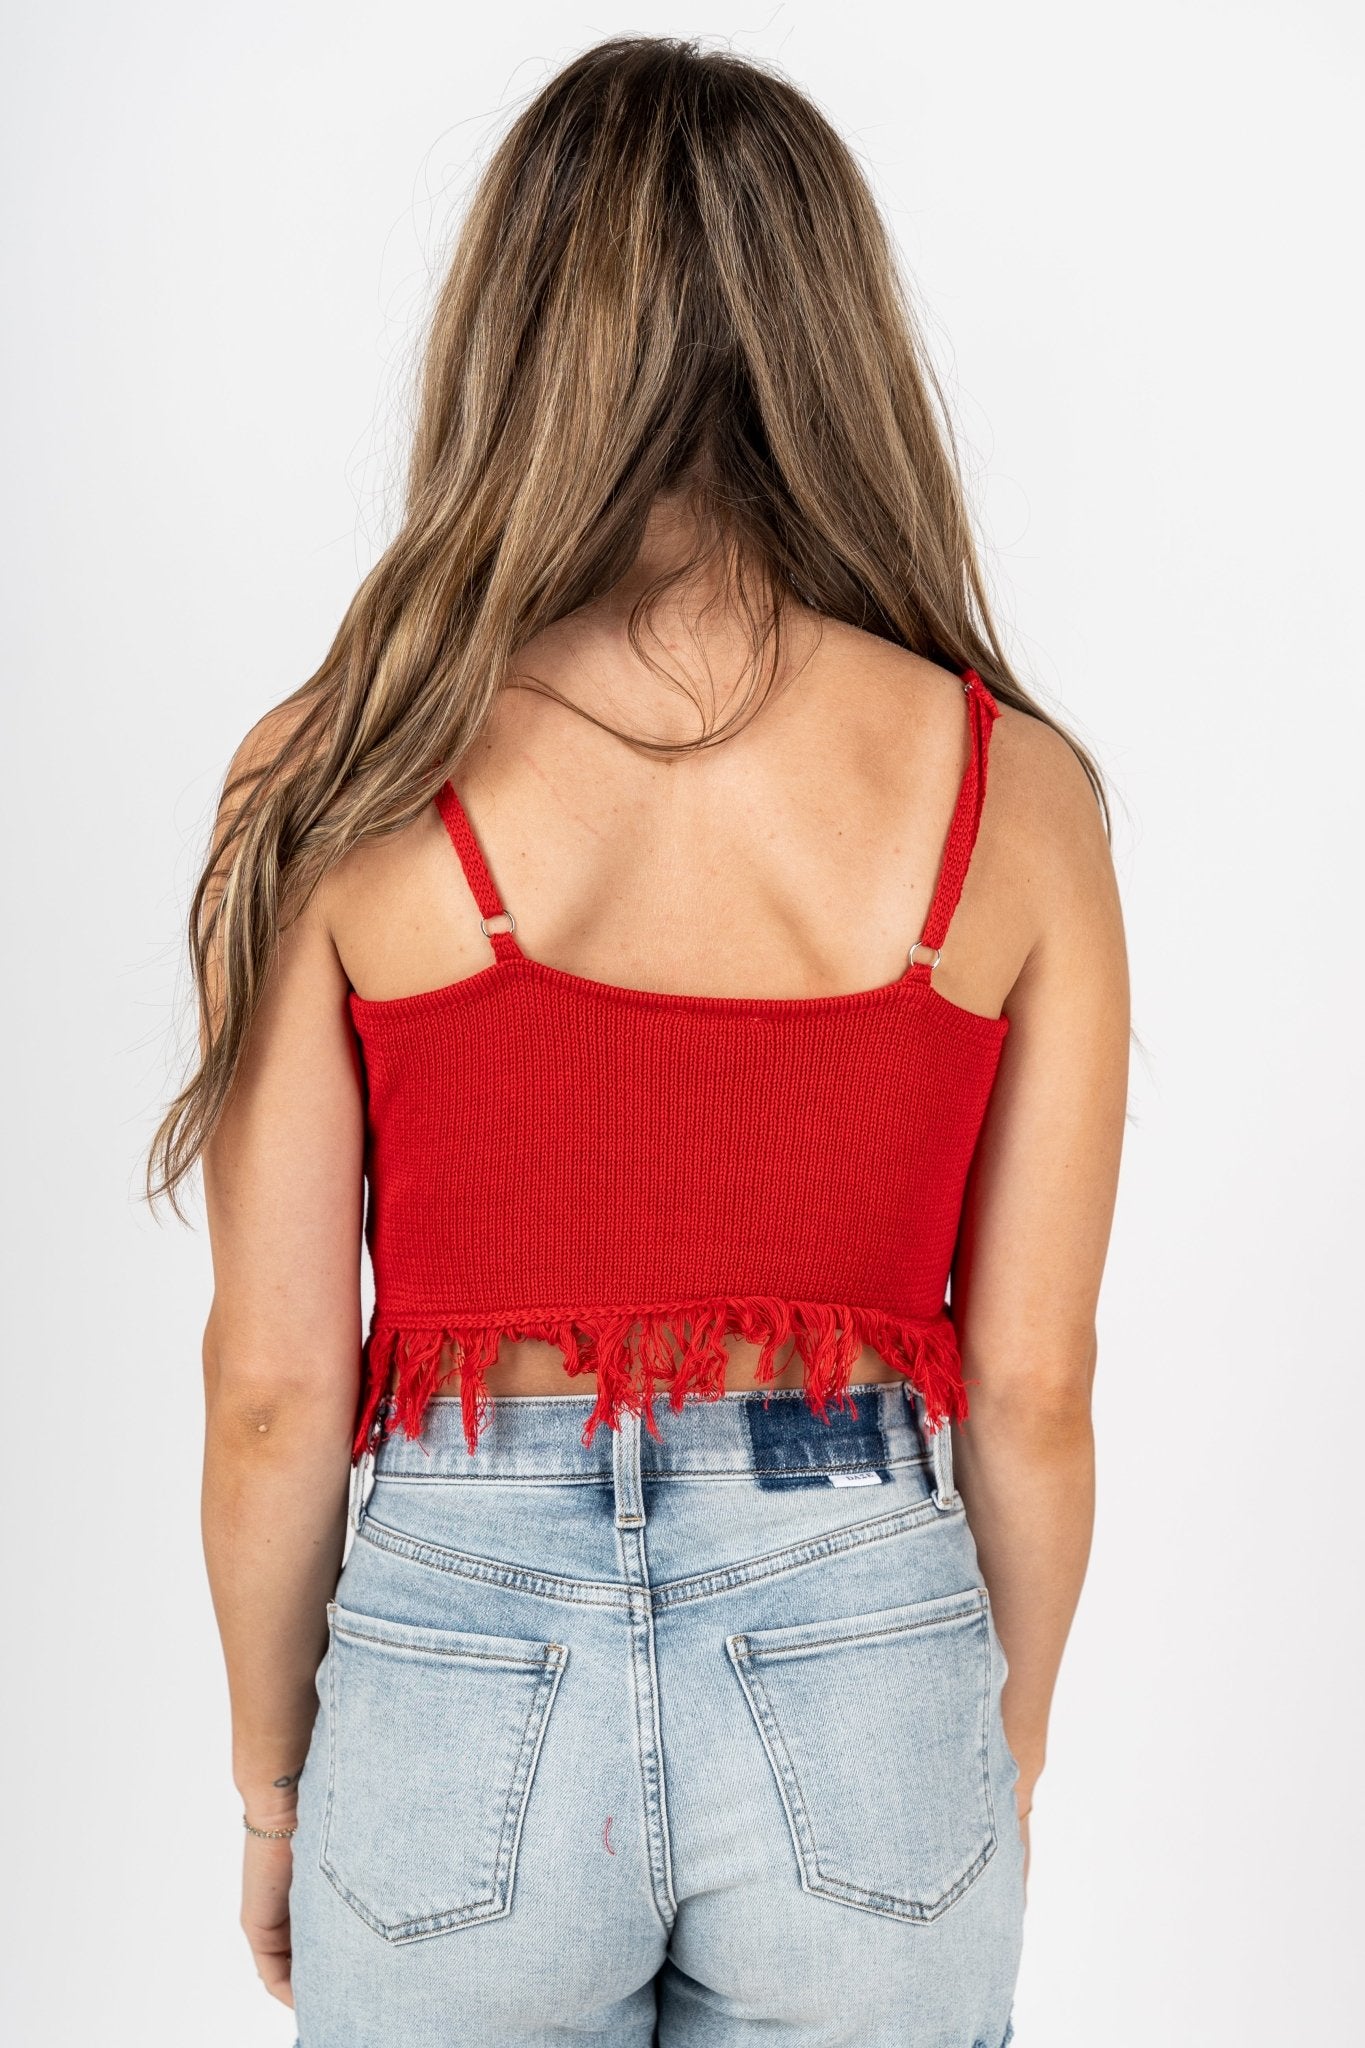 Fringe knit tank top red - Affordable tank top - Boutique Tank Tops at Lush Fashion Lounge Boutique in Oklahoma City